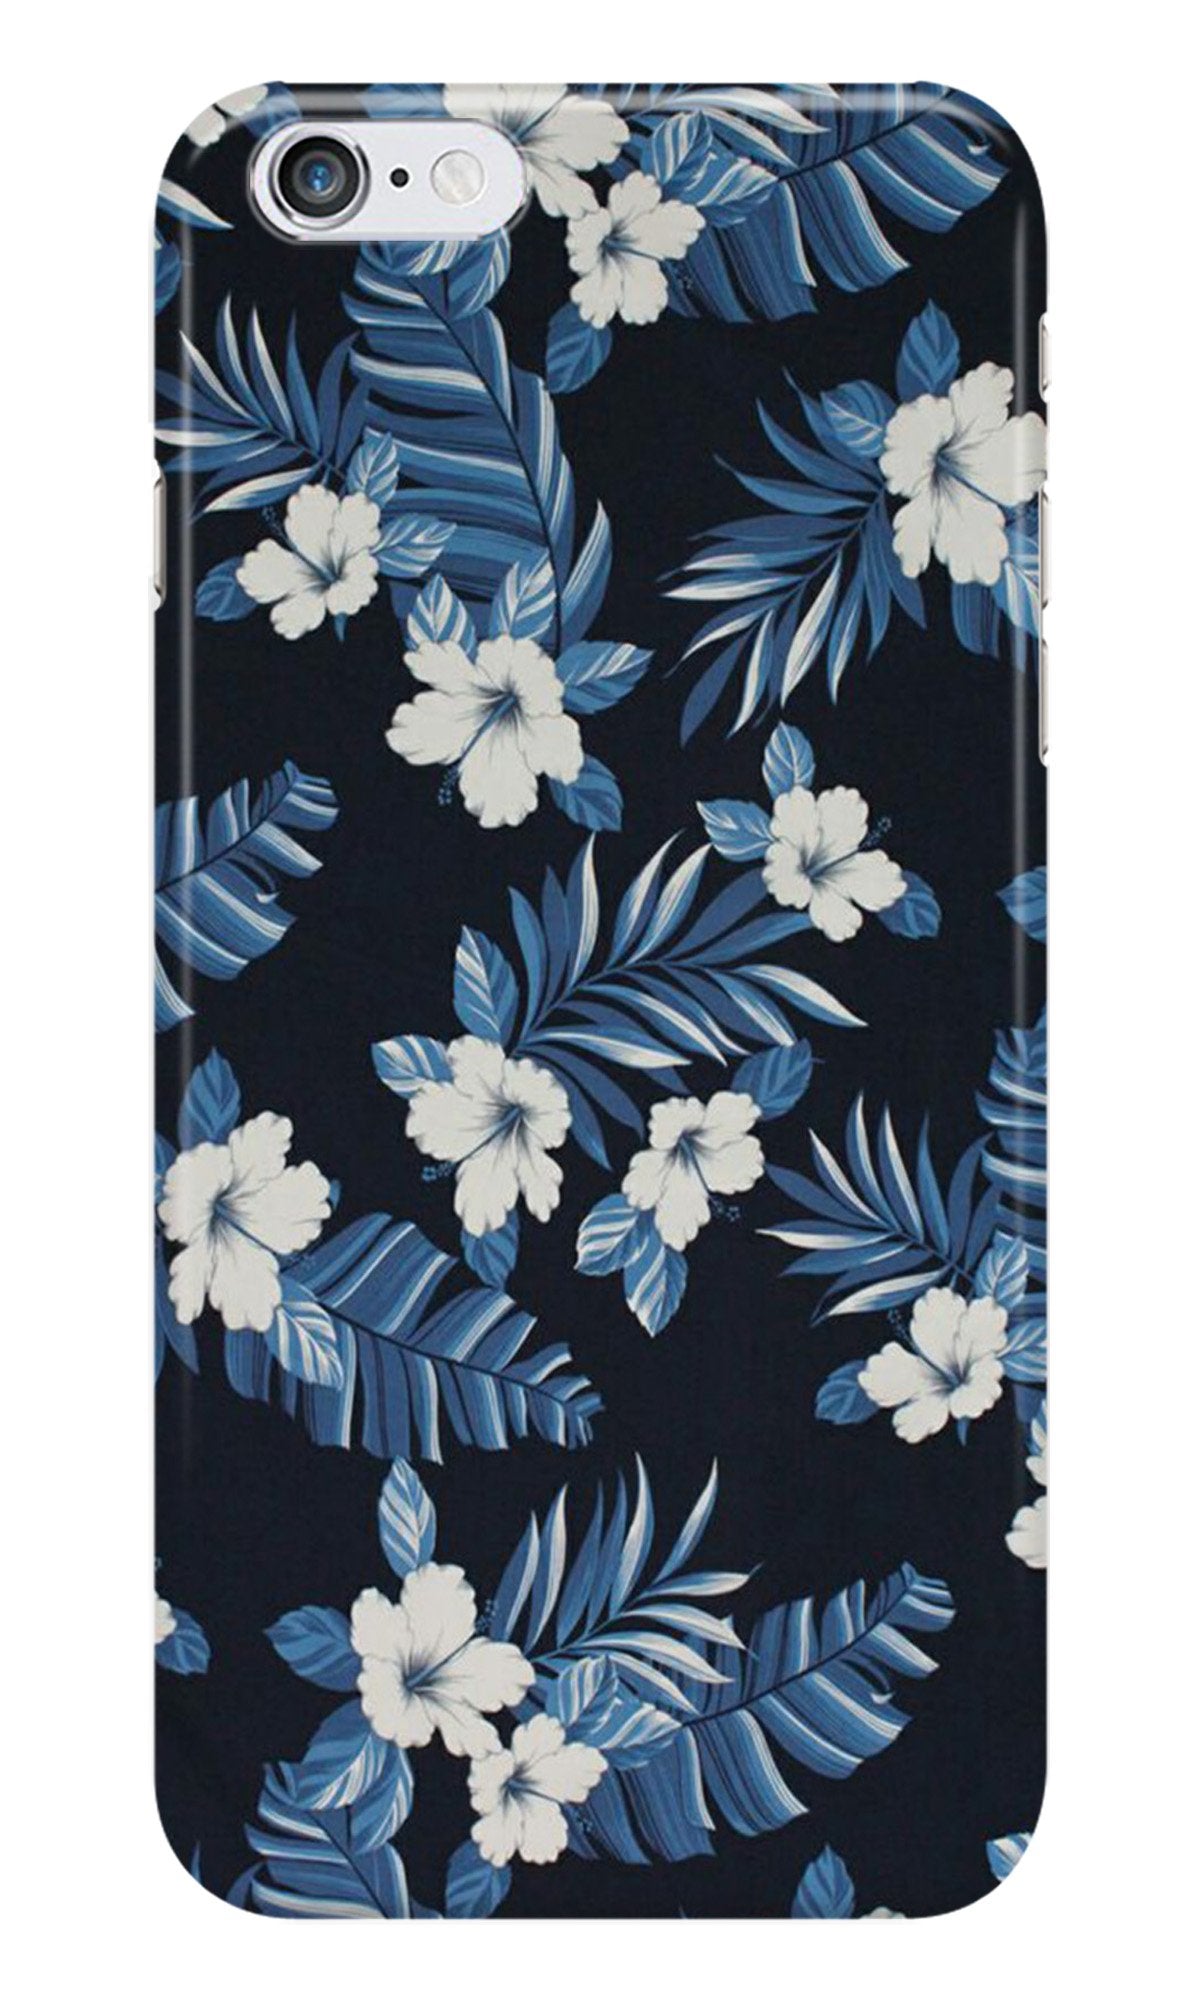 White flowers Blue Background2 Case for iPhone 6 Plus/ 6s Plus